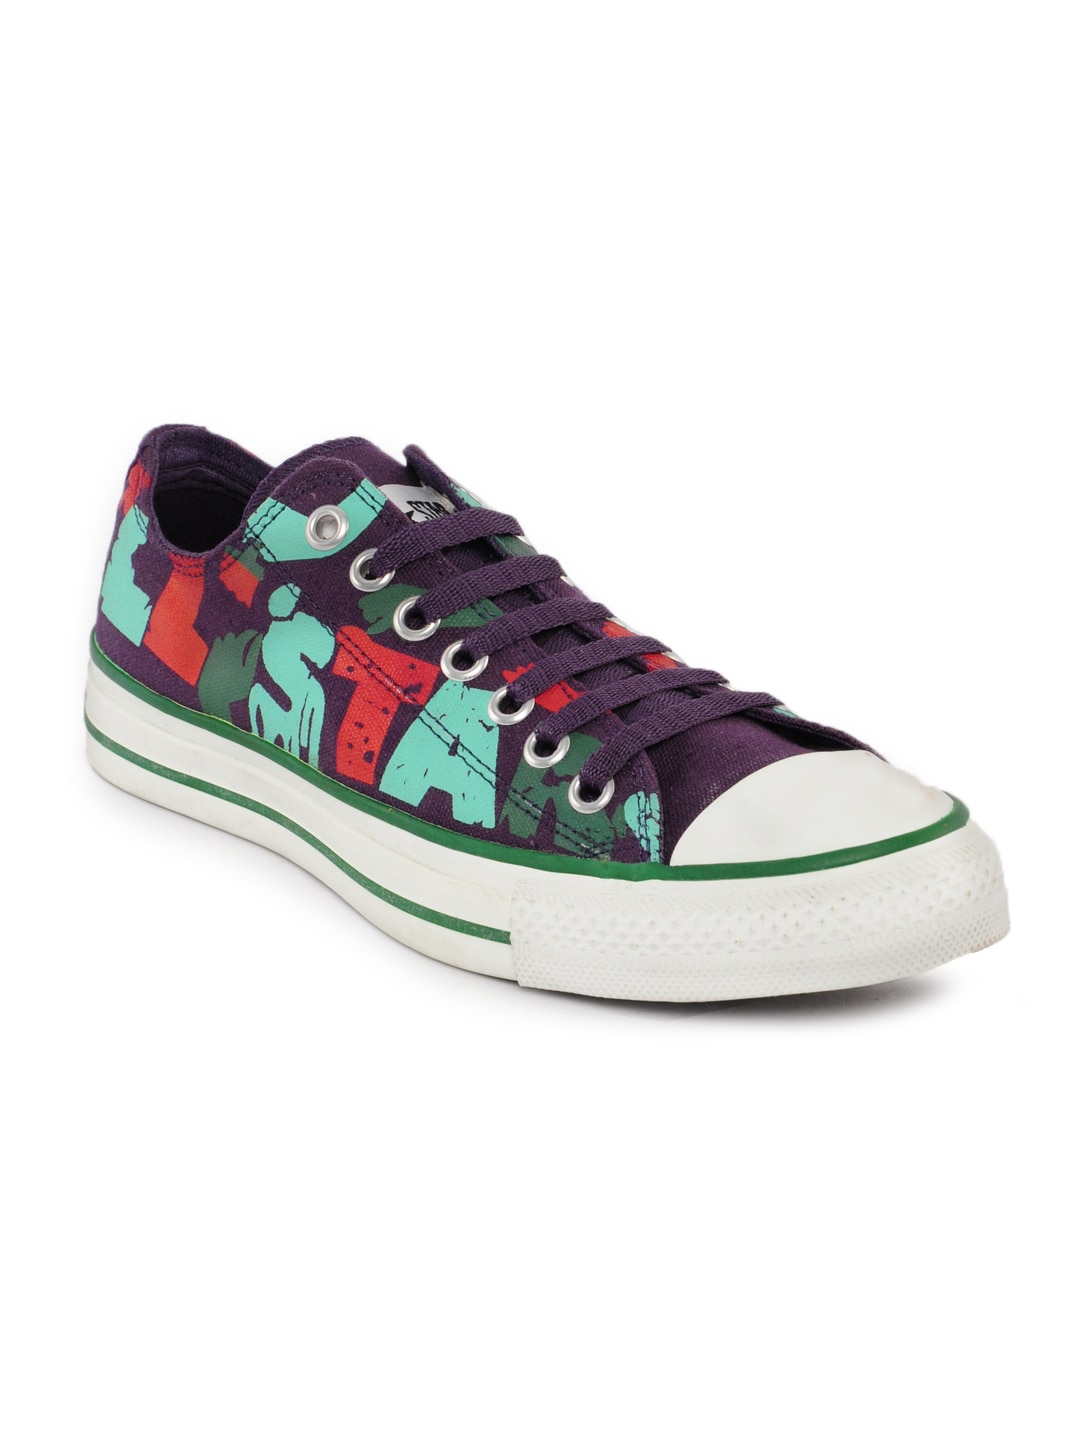 Converse Unisex Chuck Taylor All Star Print Purple Casual Shoes